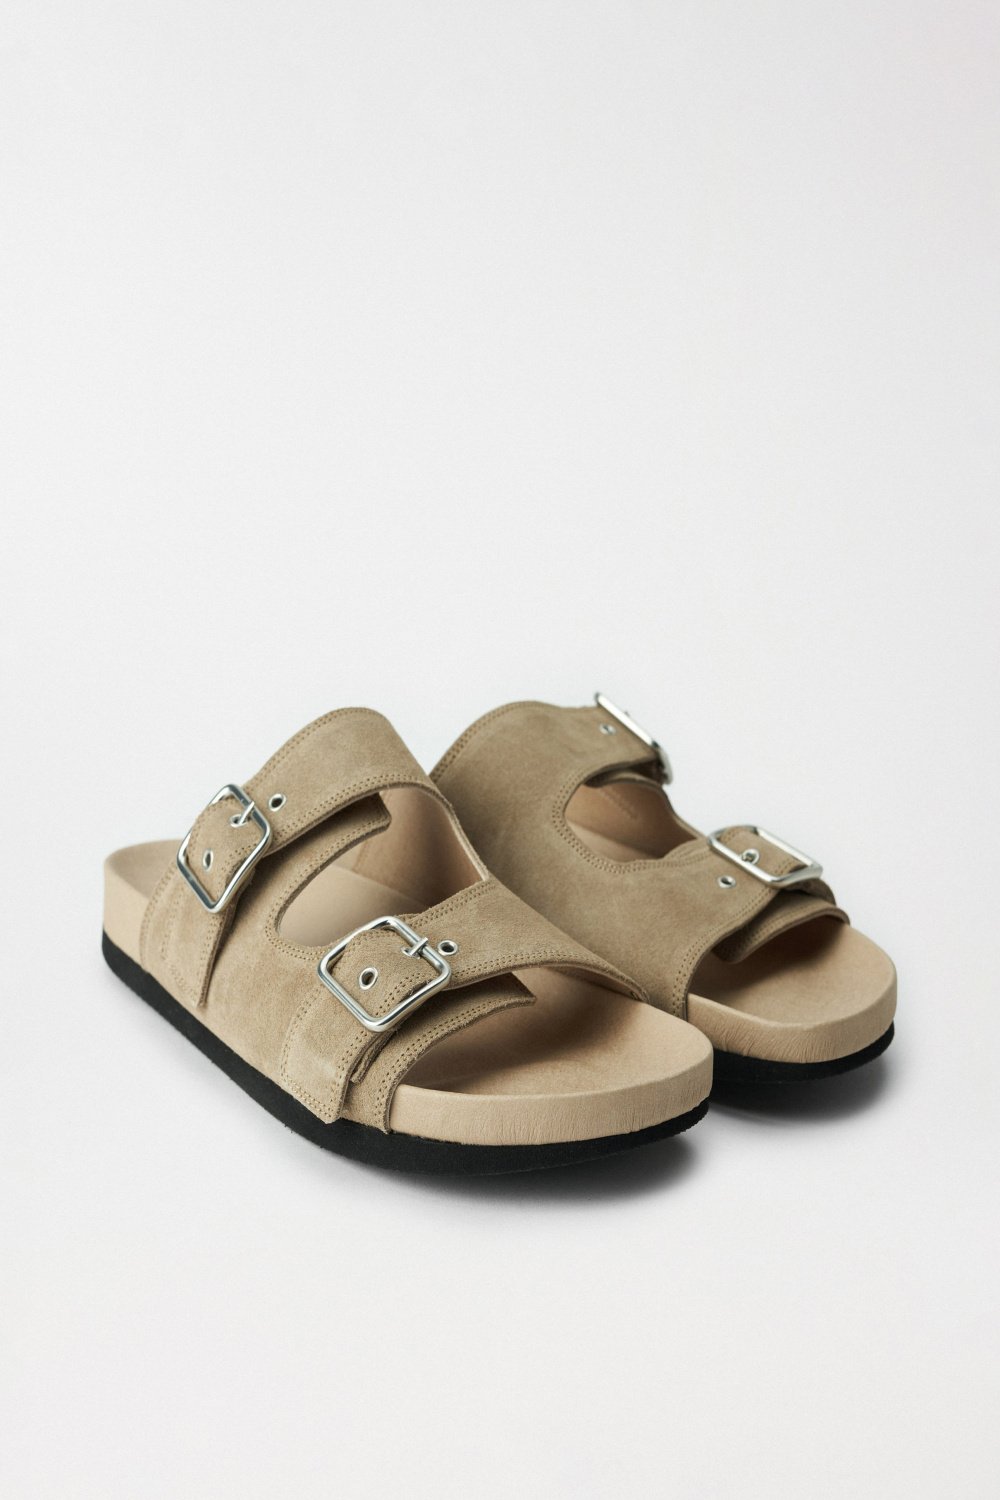 LEATHER SANDALS WITH BUCKLES - Salsa